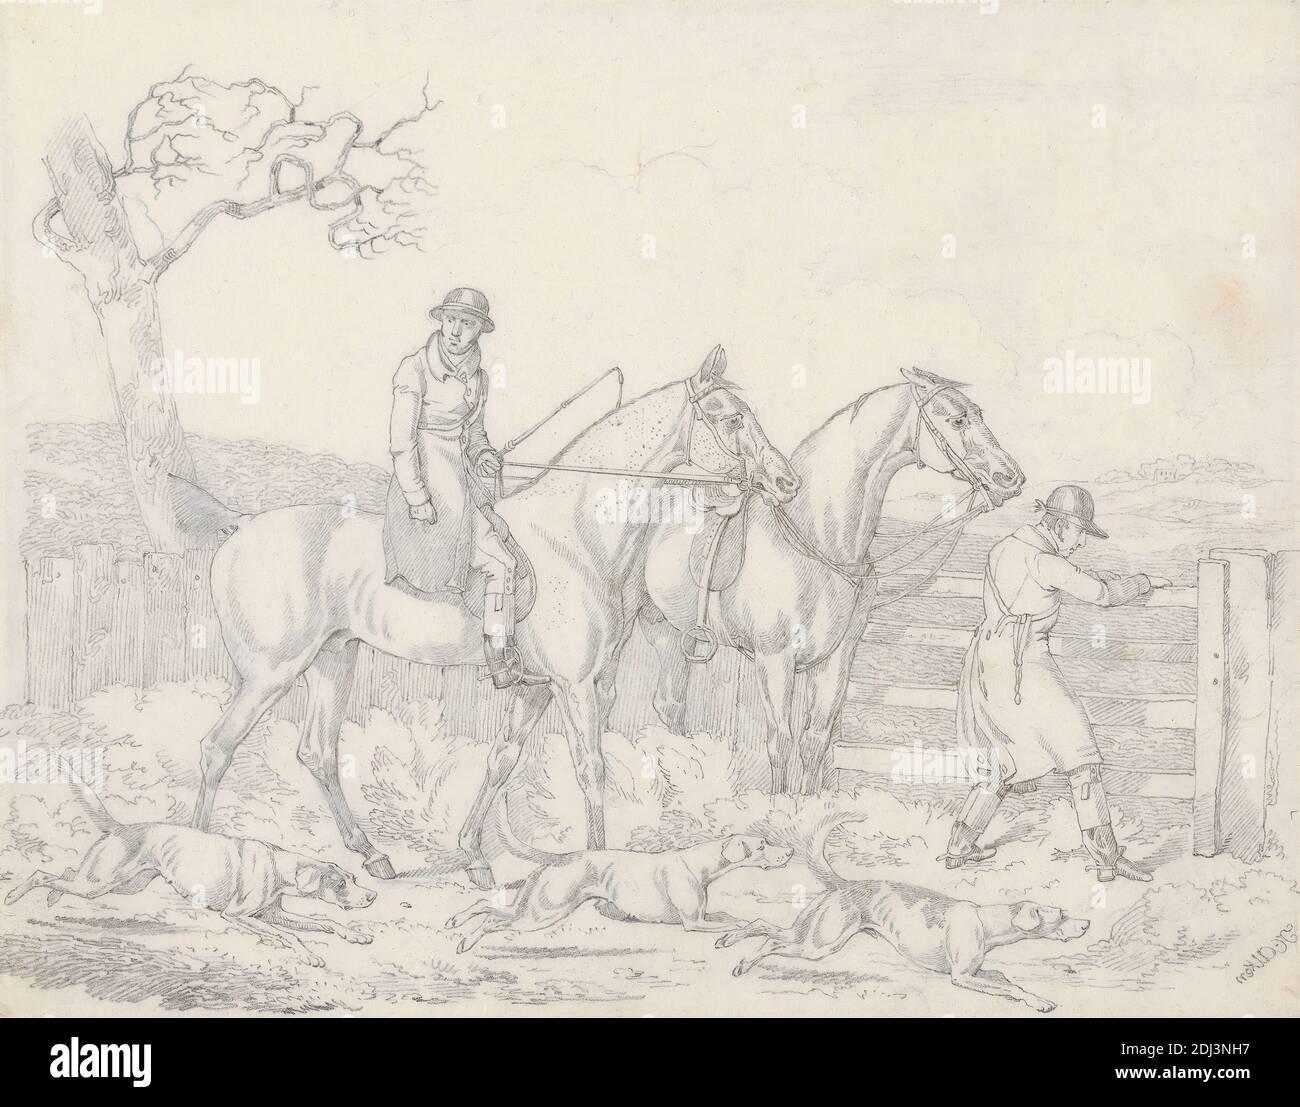 Scraps', No. 24: Hunting -Ttwo Riders, One Opening a Gate For Hounds, Henry Thomas Alken, 1785–1851, British, 1823, Graphite and white gouache on medium, slightly textured, blued white, wove paper, Sheet: 7 3/16 × 9 3/16 inches (18.3 × 23.3 cm), dogs (animals), fence, gate, horseback riders, horseback riding, horses (animals), hounds (dogs), hunt, hunters, hunting, men, sporting art, tree, whip Stock Photo